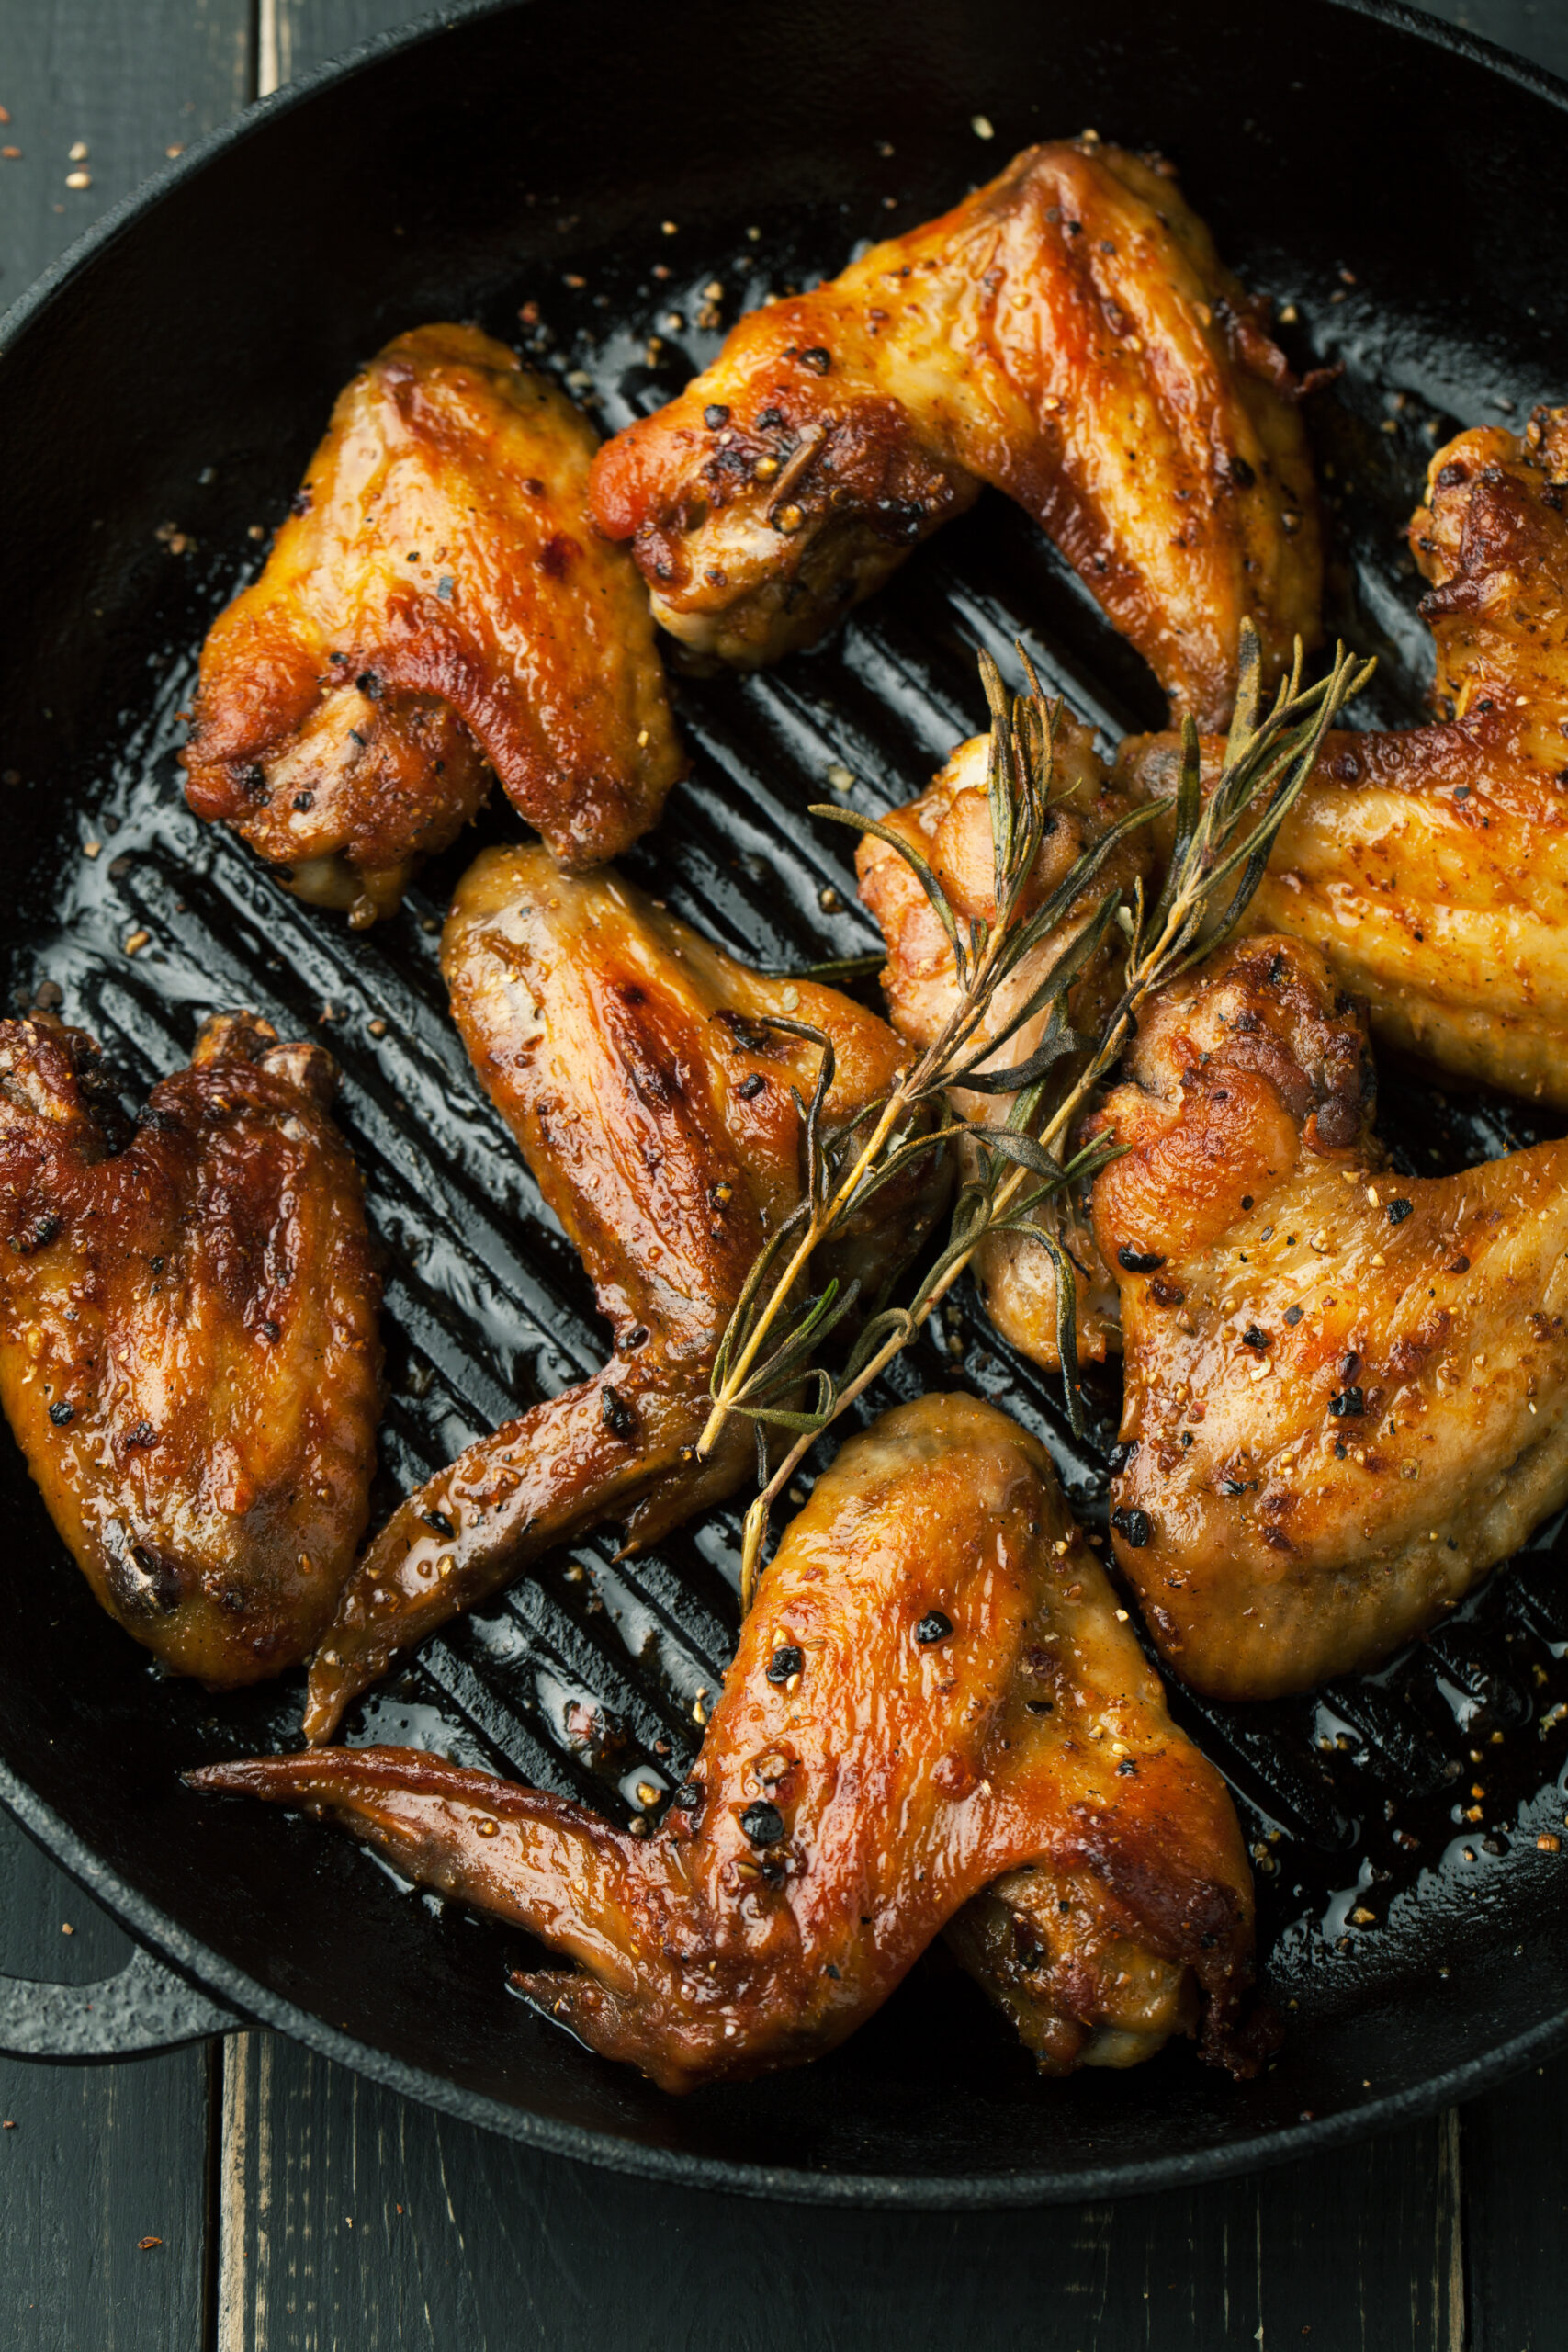 grilled chicken wings with spices and rosemary 2021 09 01 22 35 50 utc scaled